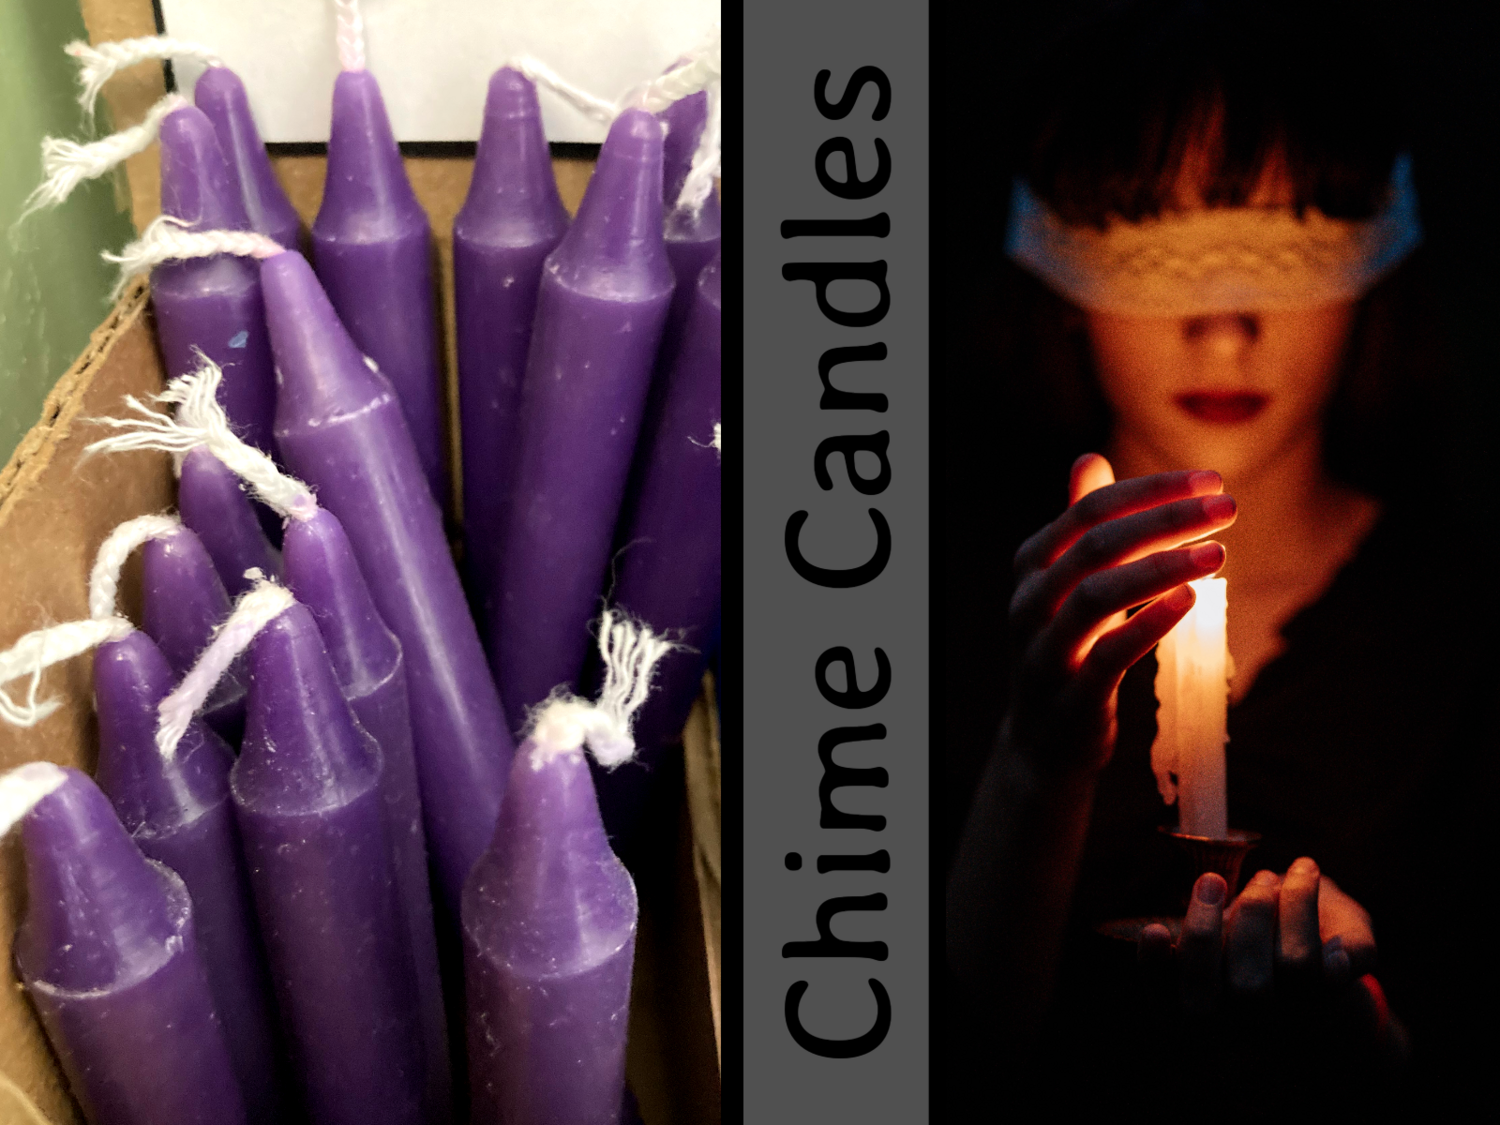 5” Purple Chime Candles - 